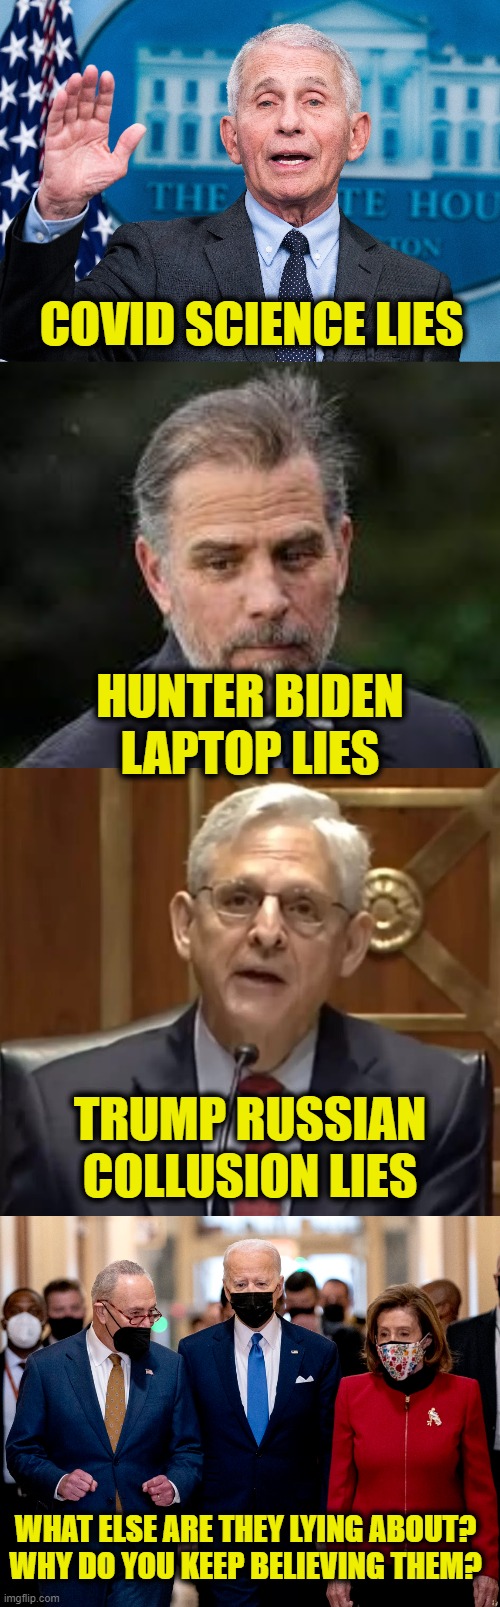 Lies are truth "1984" | COVID SCIENCE LIES; HUNTER BIDEN
LAPTOP LIES; TRUMP RUSSIAN
COLLUSION LIES; WHAT ELSE ARE THEY LYING ABOUT?
WHY DO YOU KEEP BELIEVING THEM? | image tagged in orwellian | made w/ Imgflip meme maker